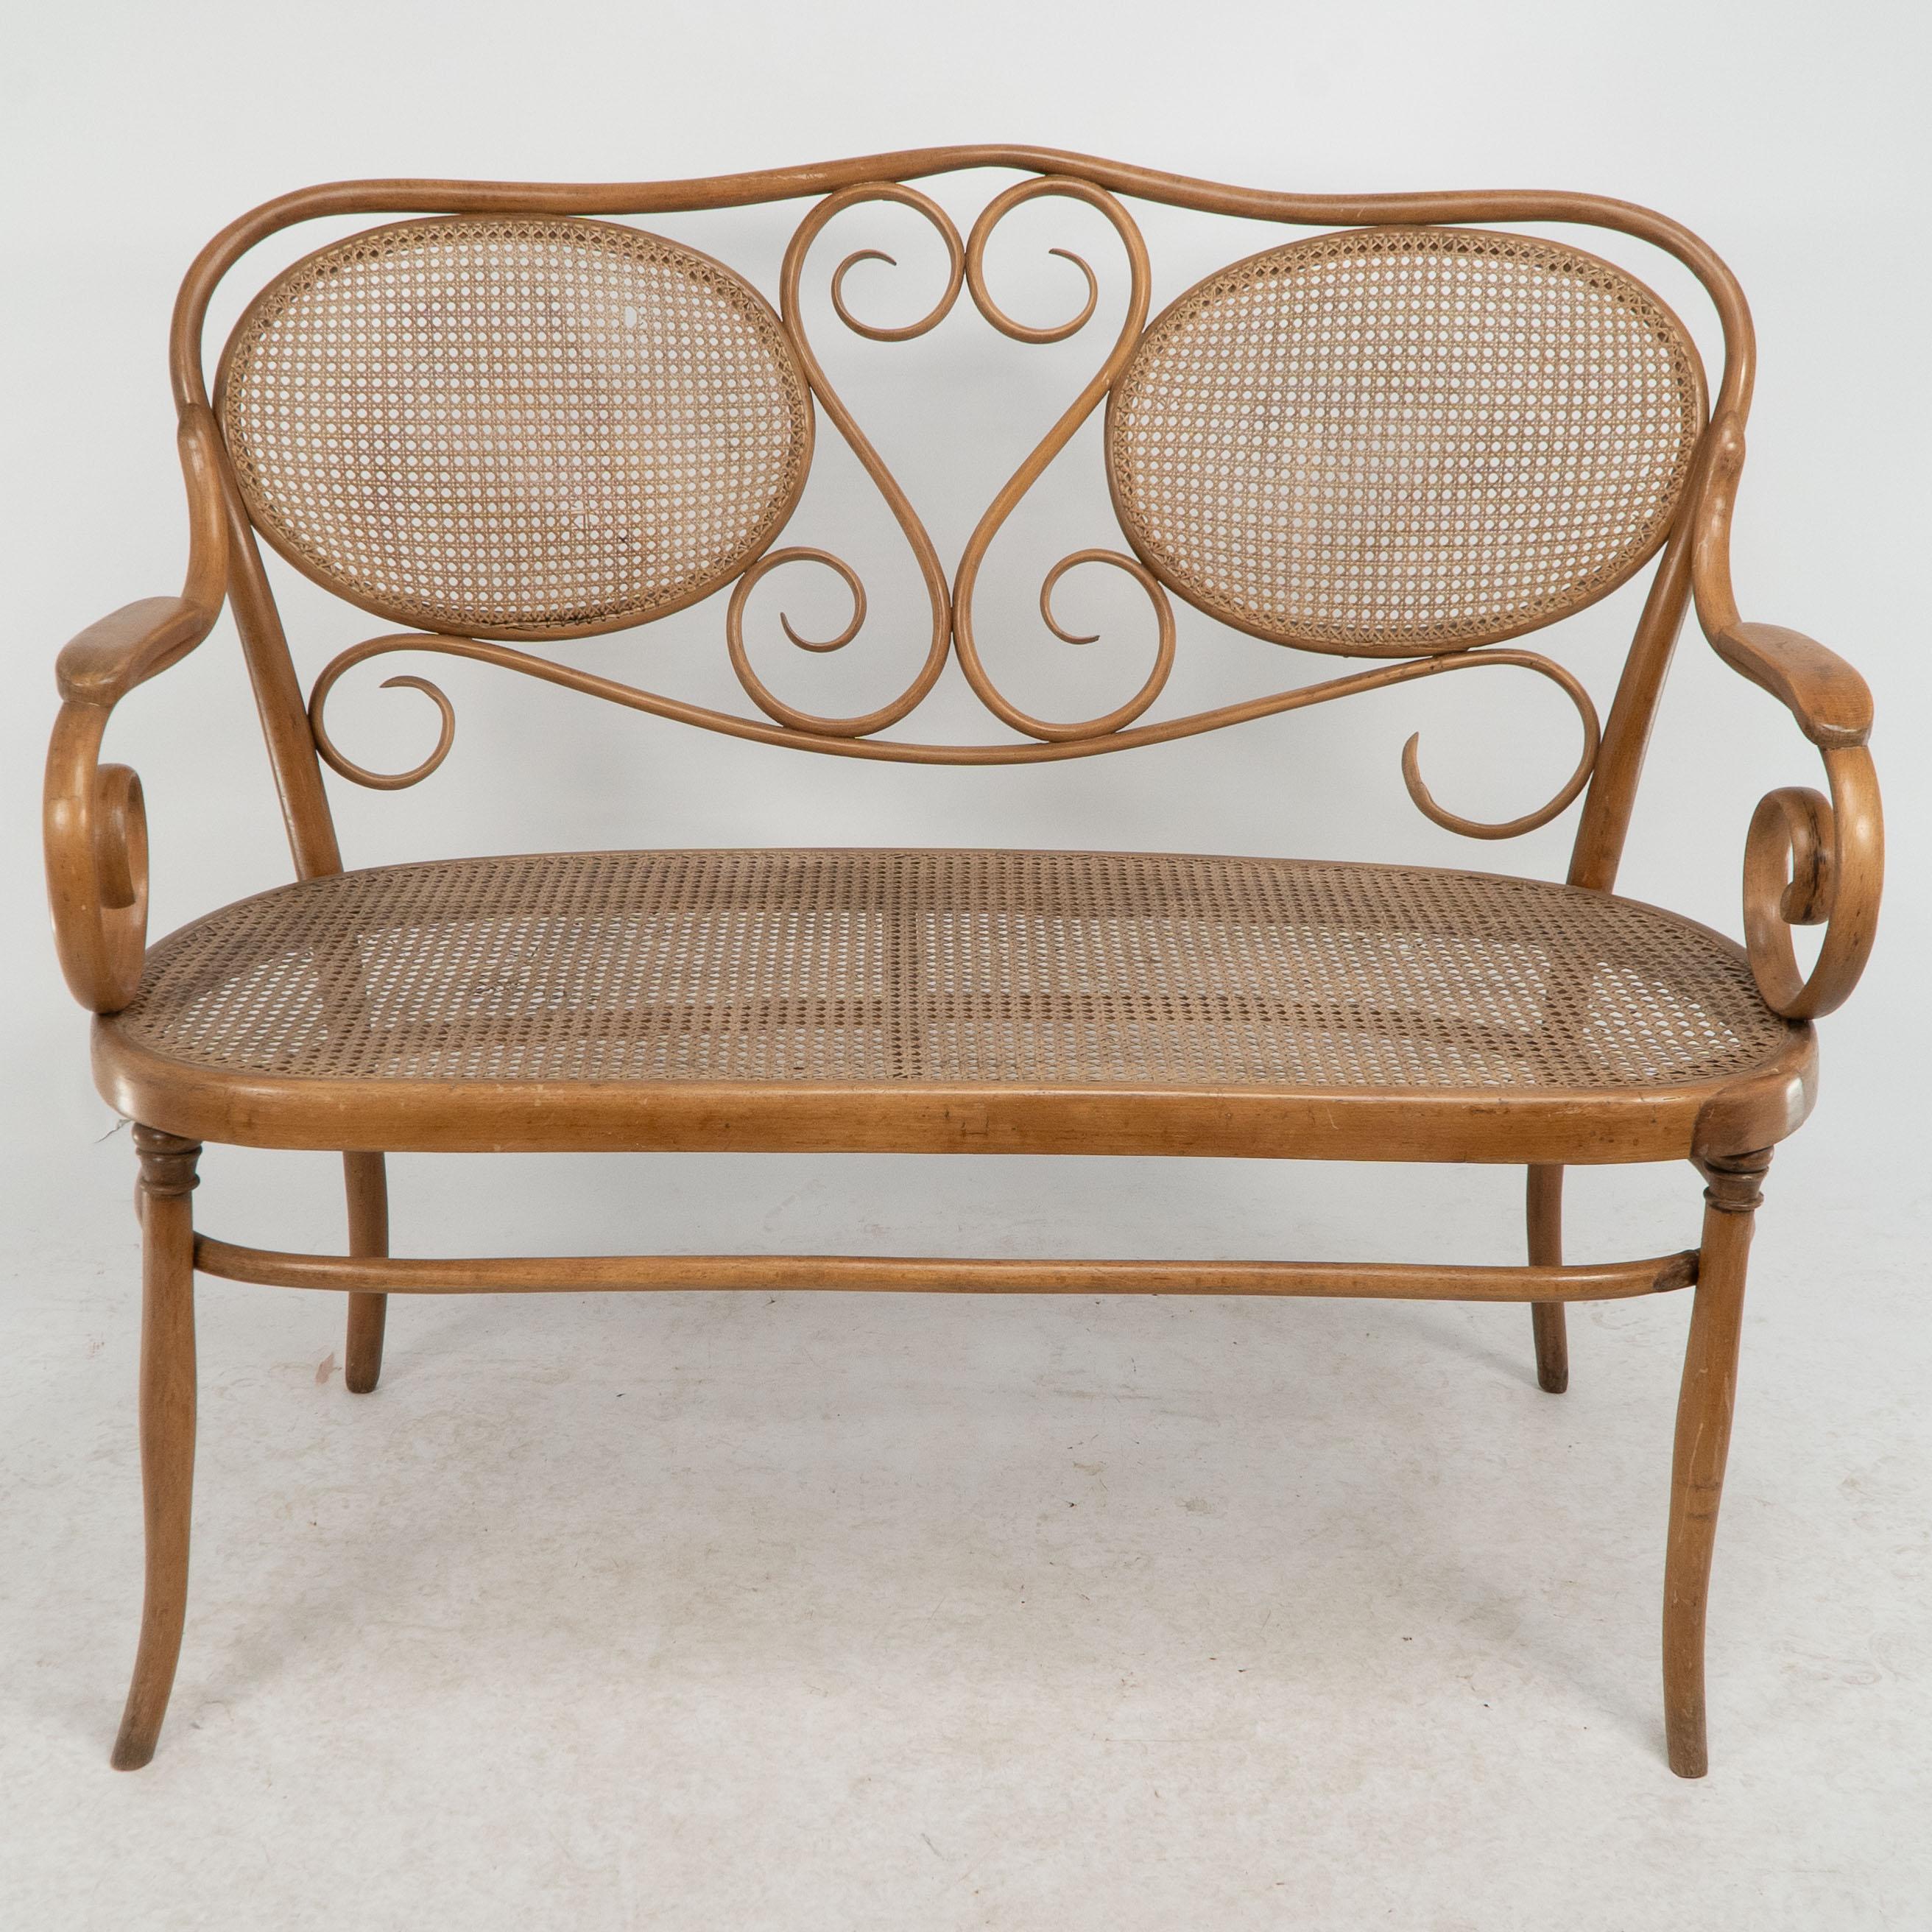 Thonet.
A bentwood Beech settee with wonderful scrollwork decoration to the back and to the arms with a caned seat and a caned back.